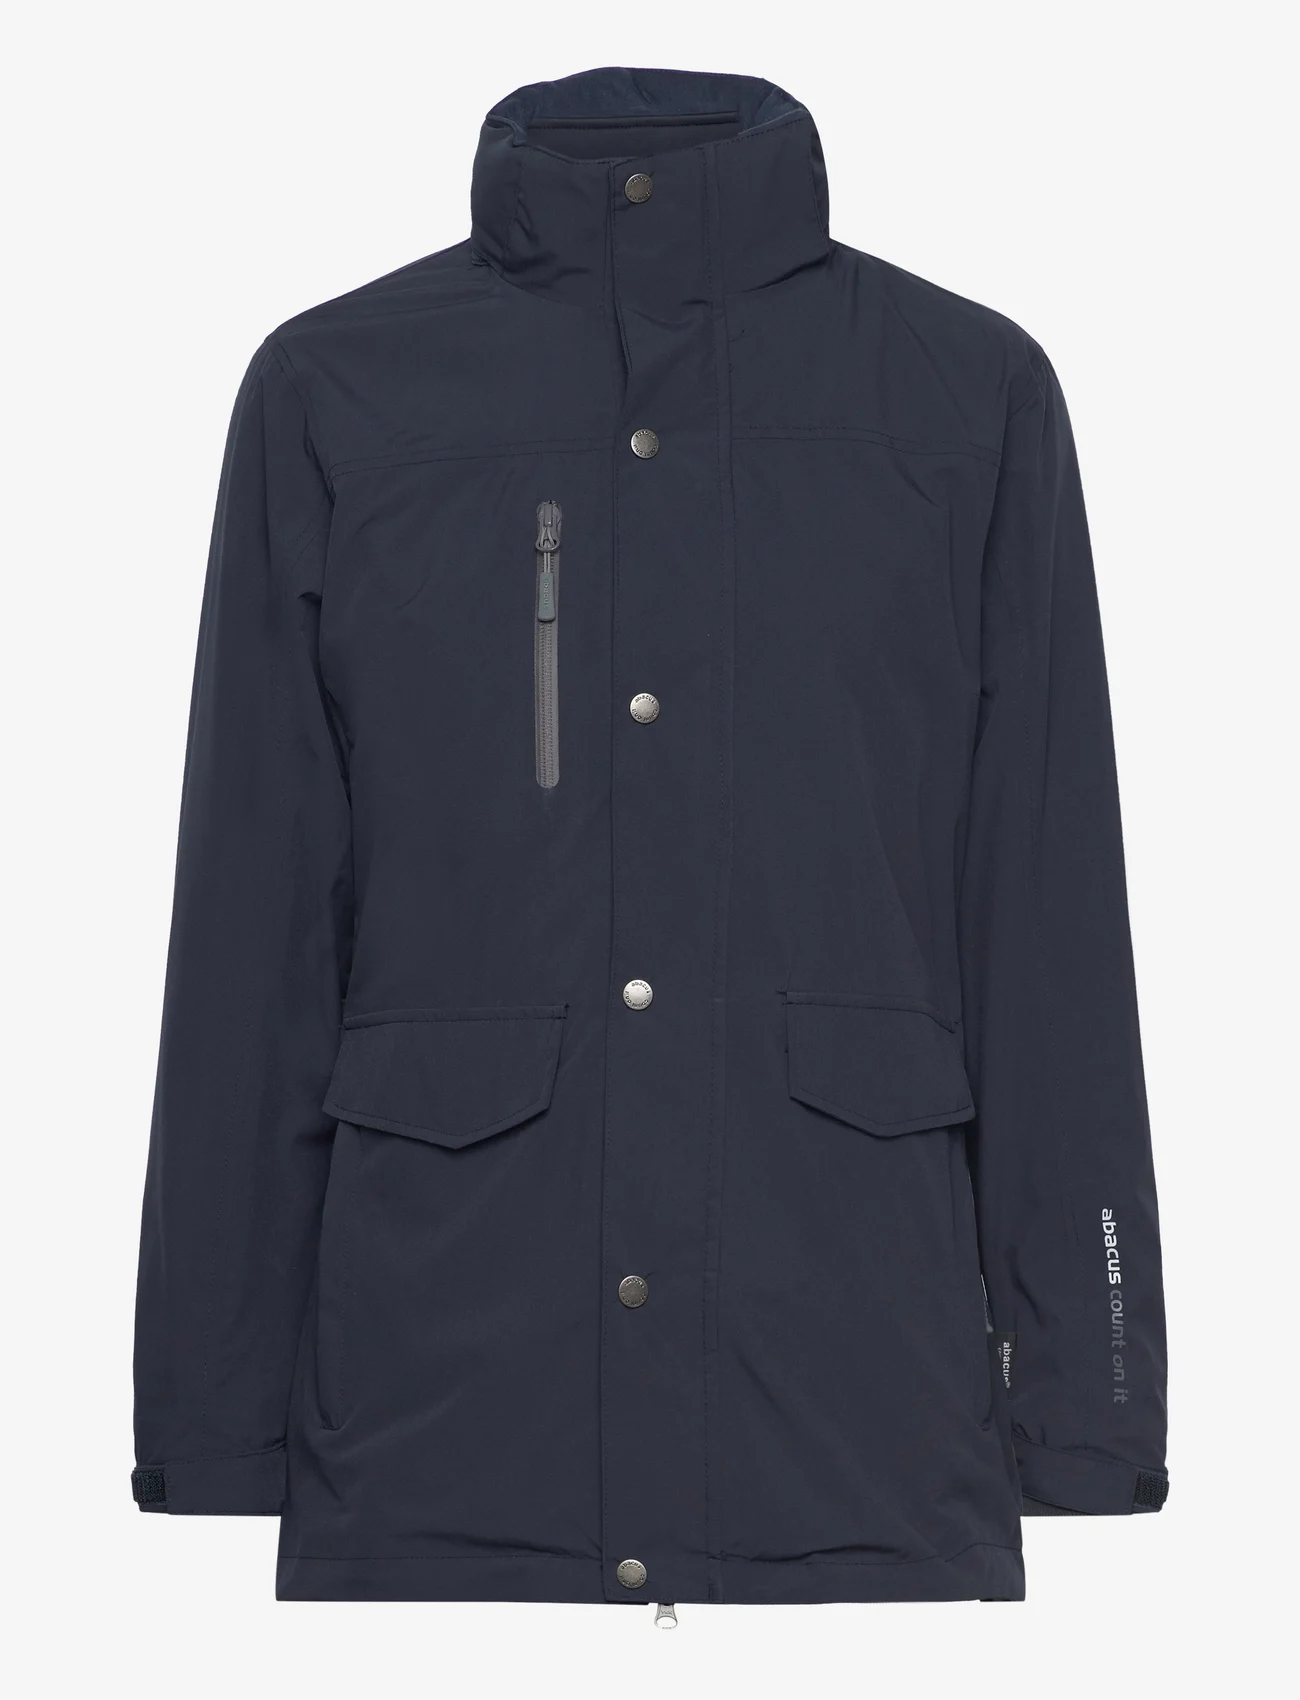 Abacus - Lds Staff 3 in1 jacket - parki - navy - 0